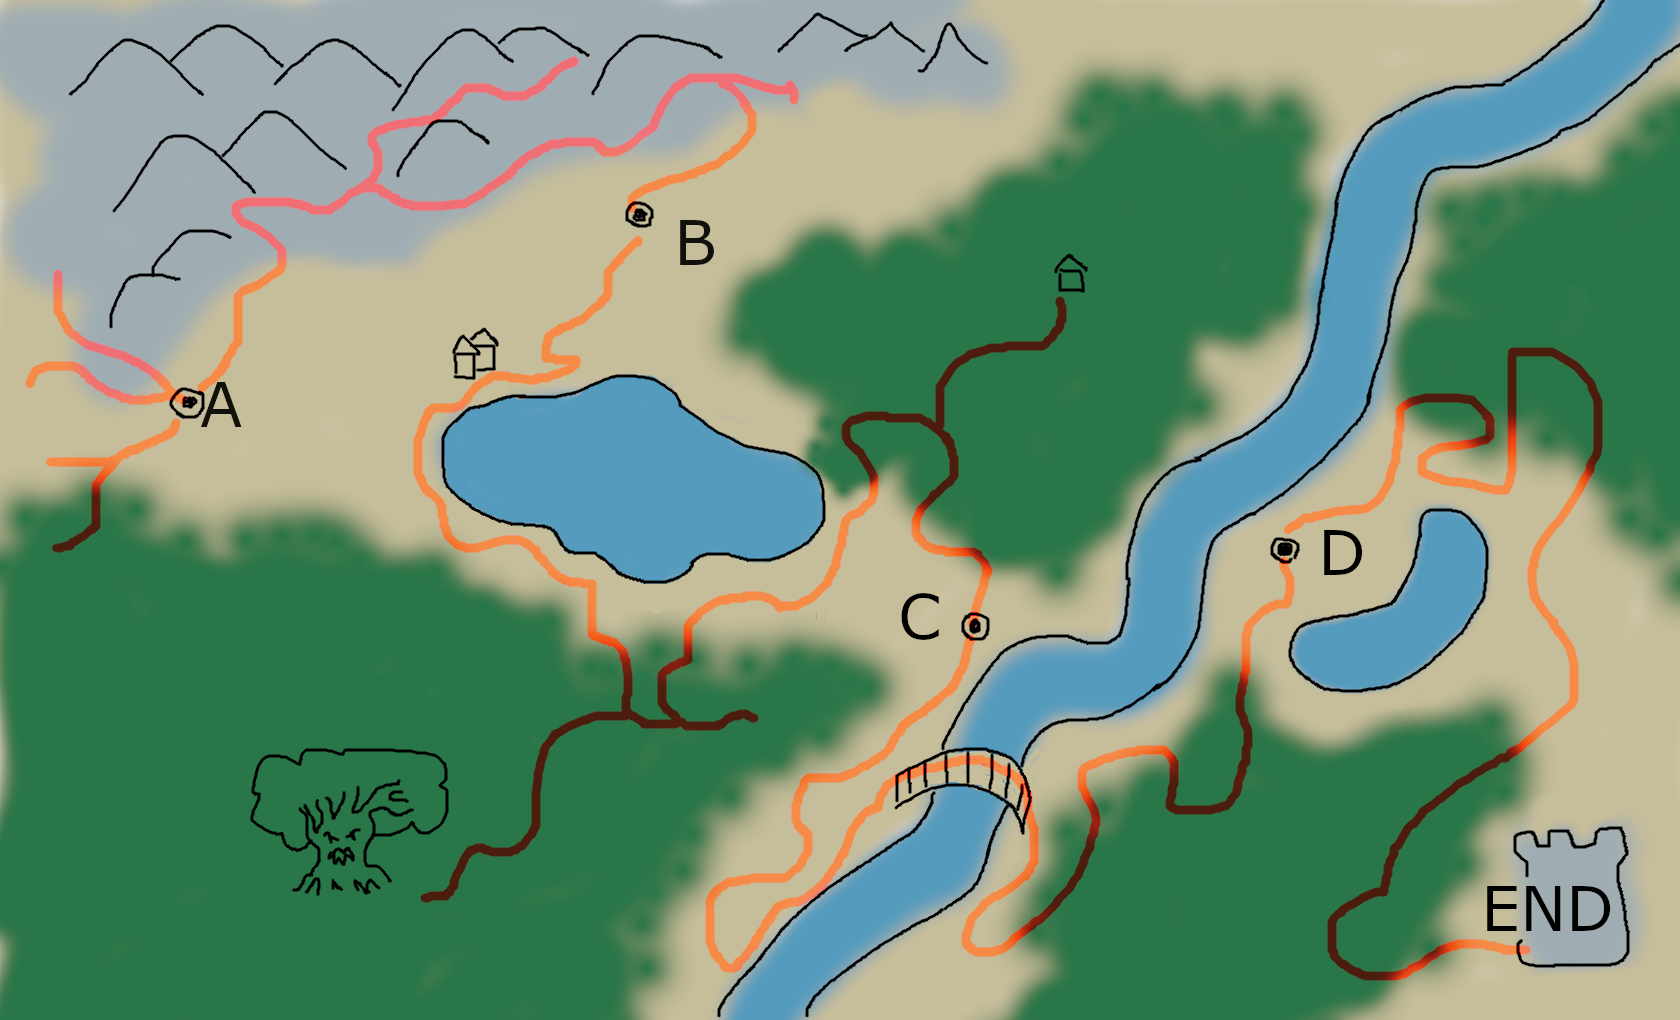 A fantasy map with a long and branching path connecting four points